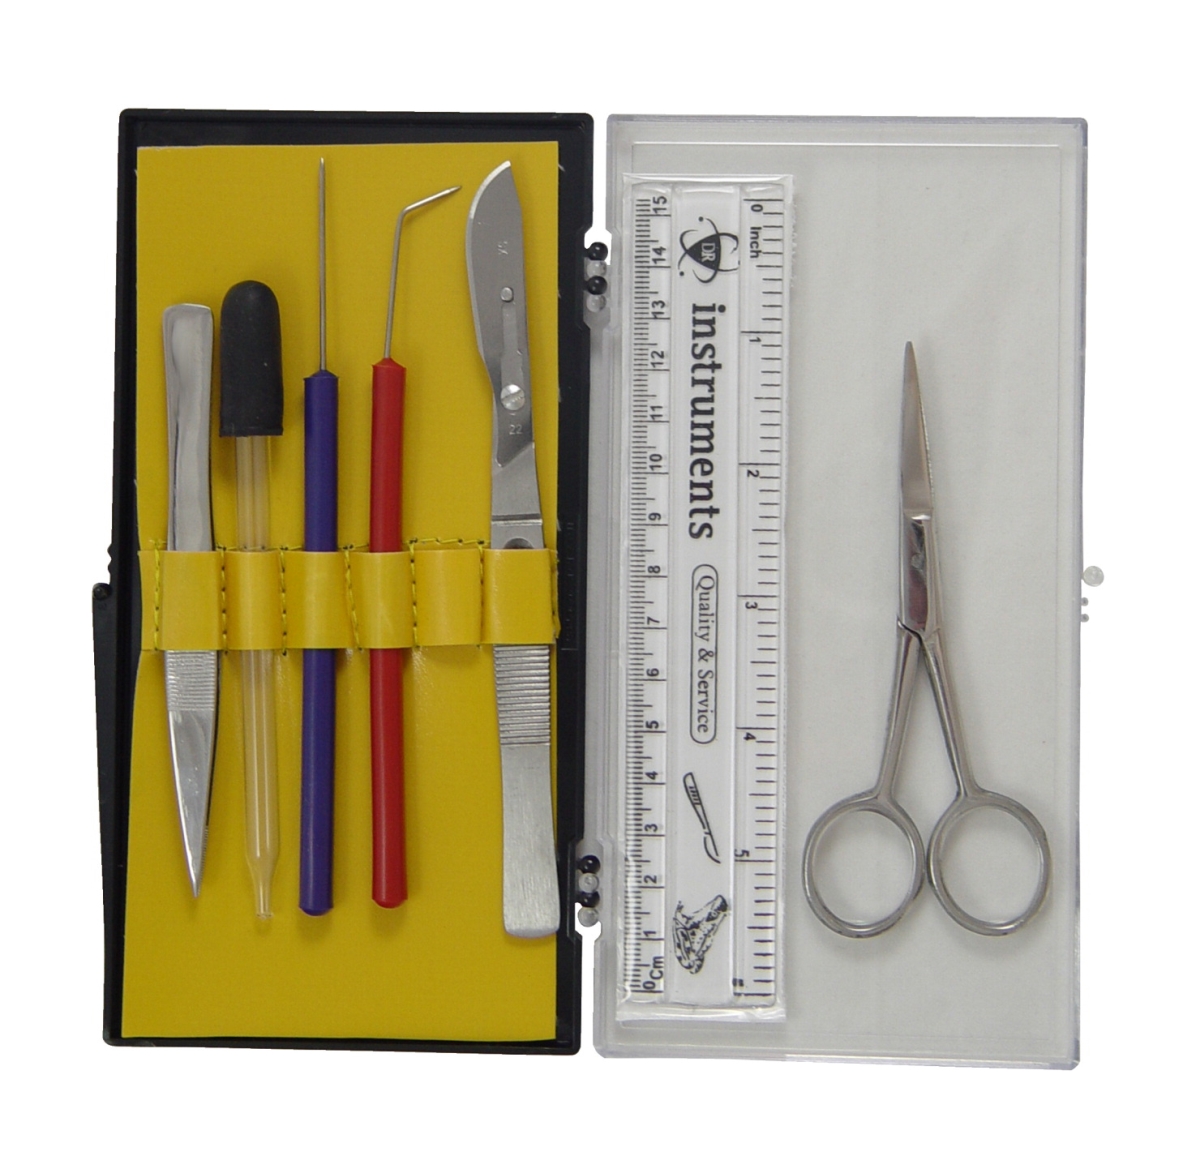 576867 Frey Scientific 61 Series Student Dissection Kit With Replaceable Blade Scalpel - Plastic Case